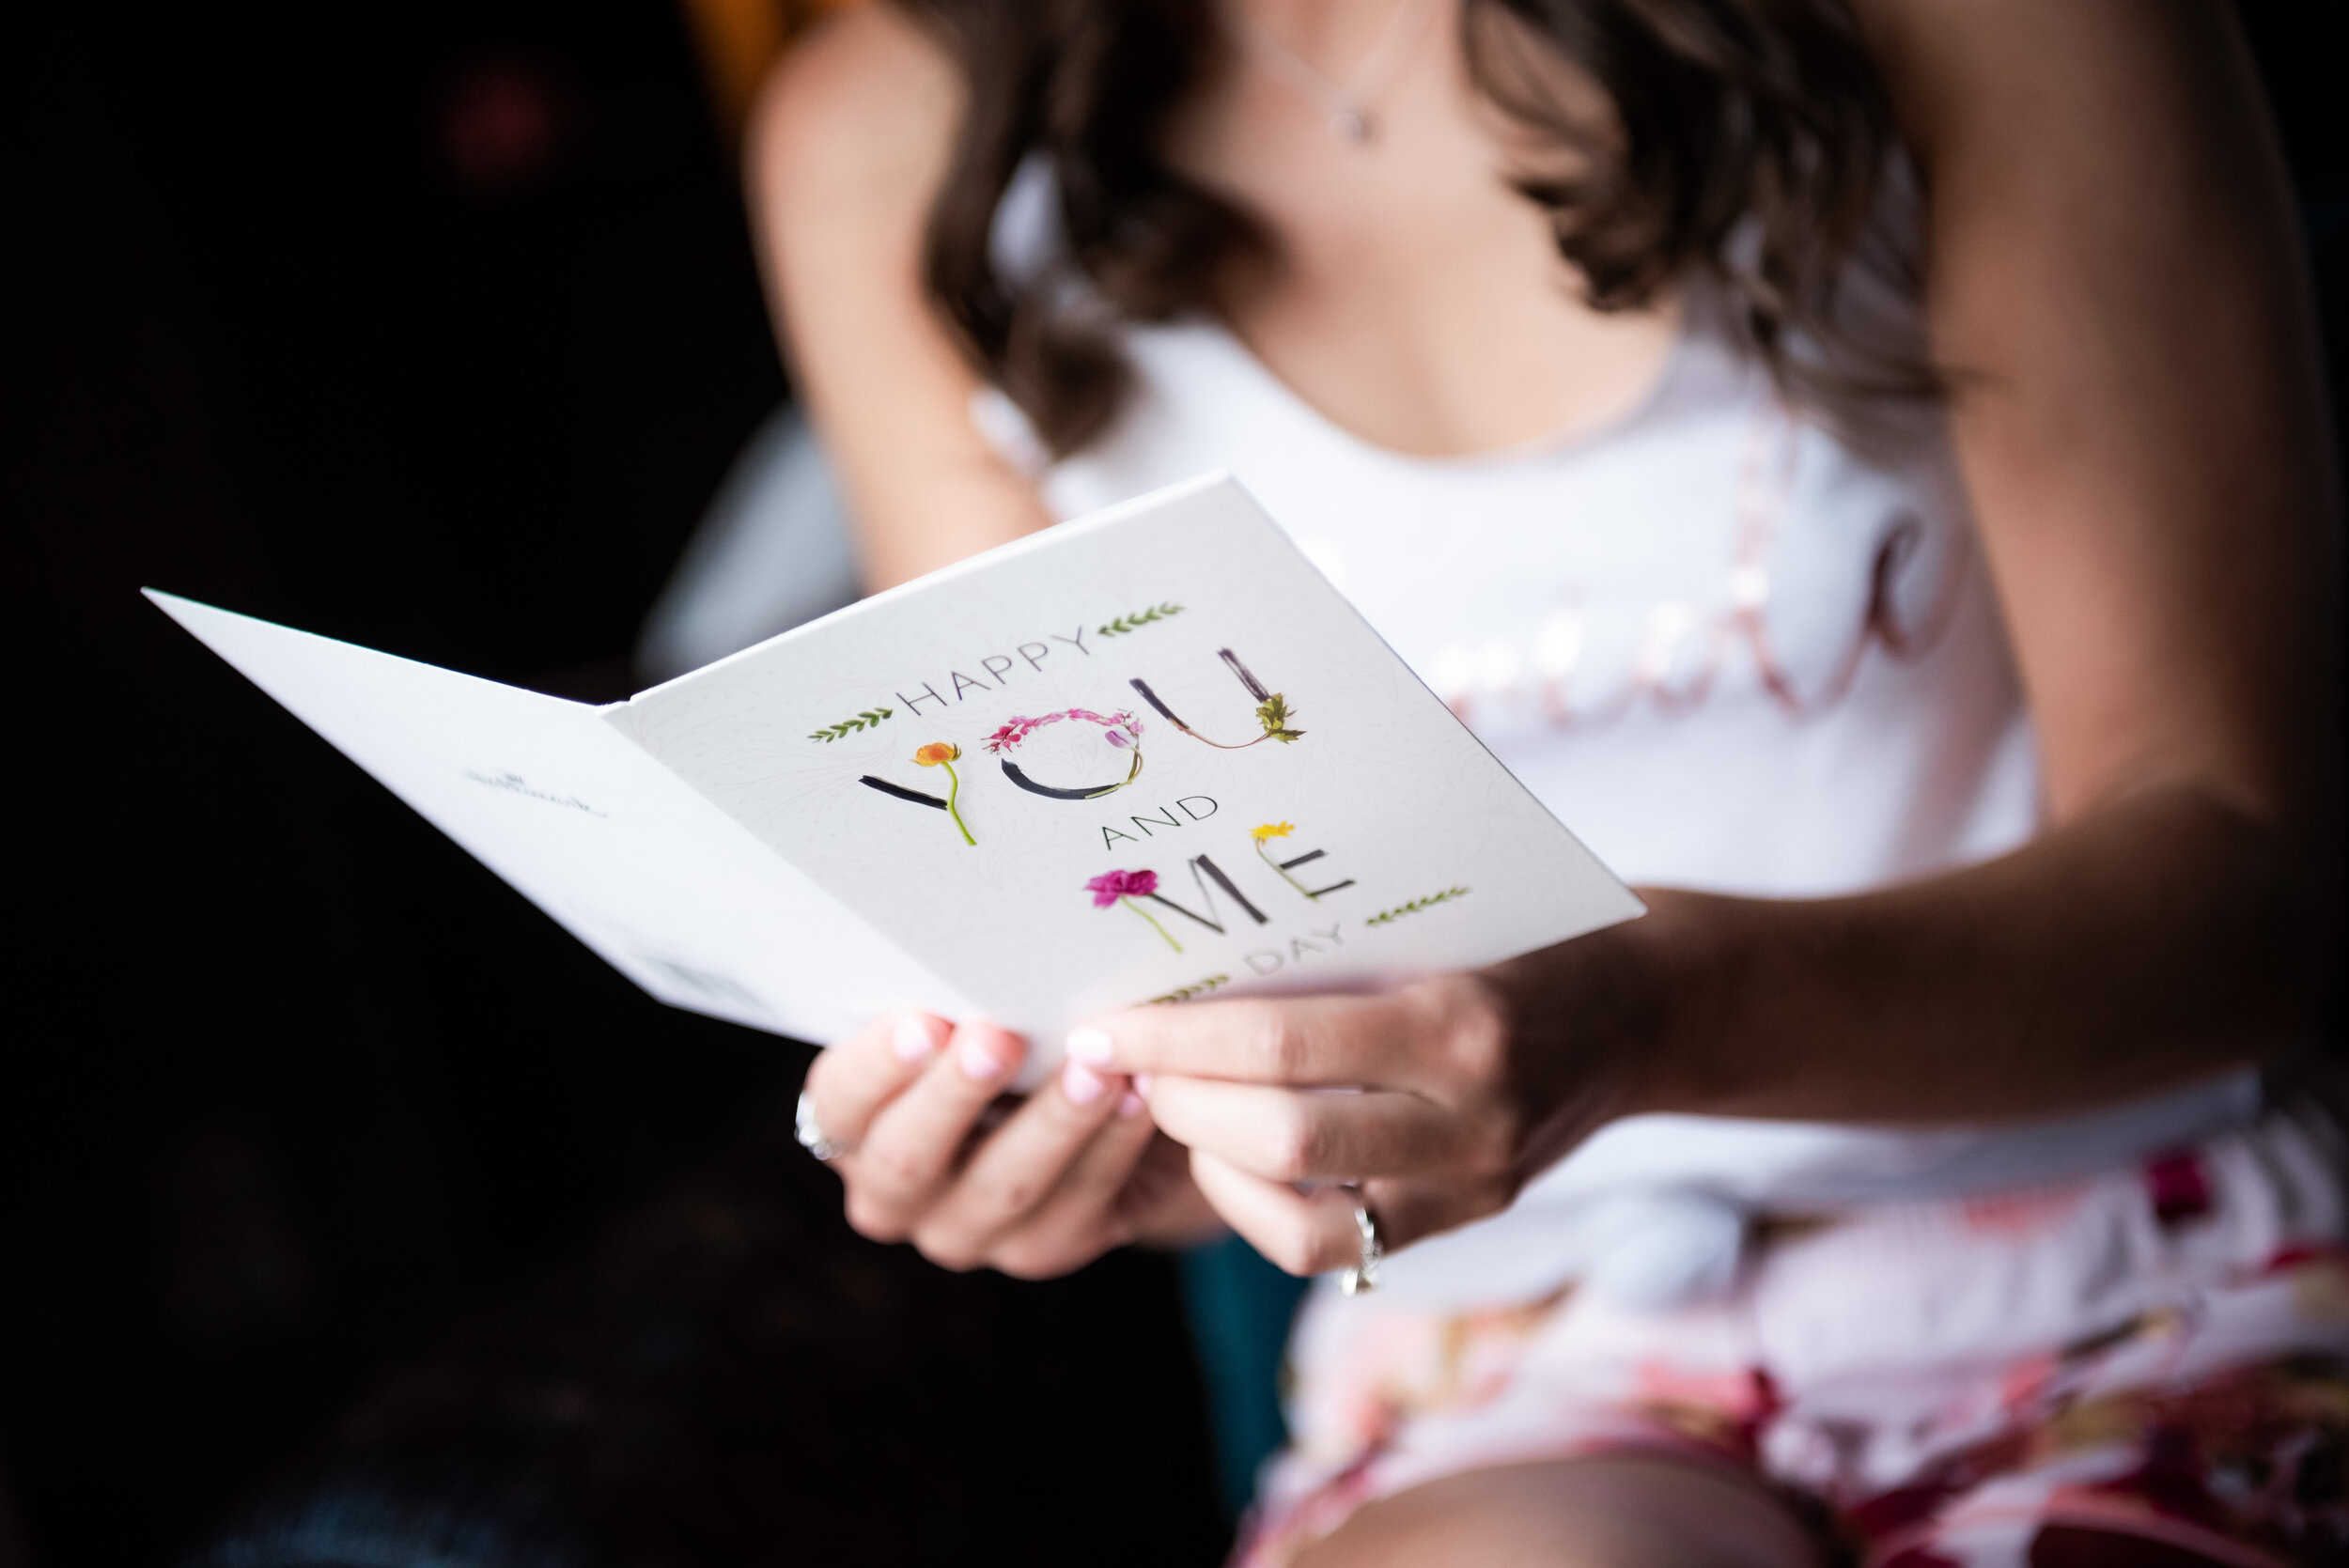 Wedding card from the groom: Loews Chicago Hotel Wedding captured by J. Brown Photography